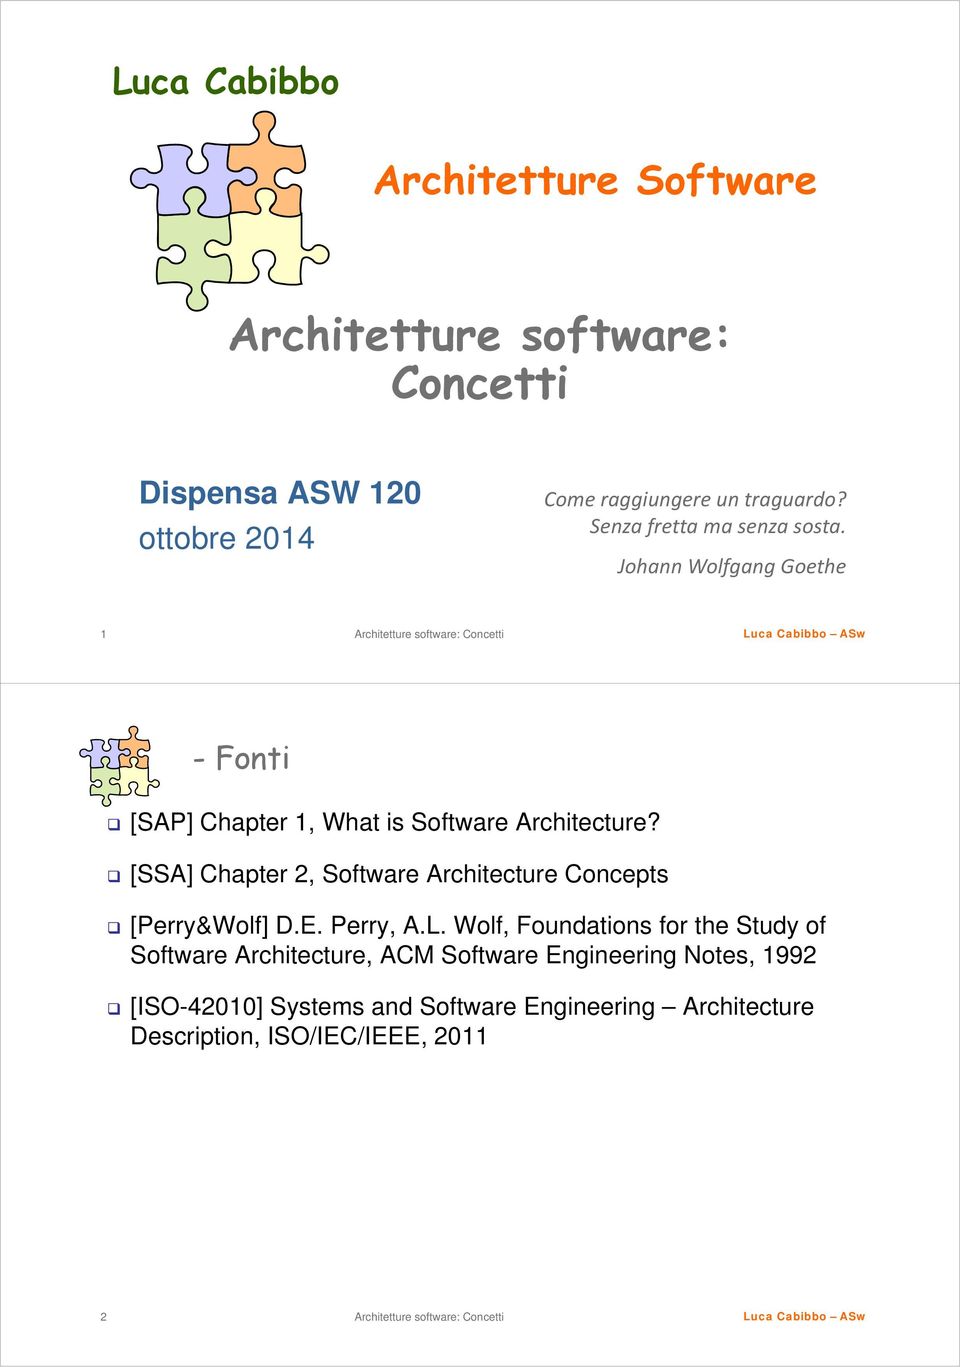 [SSA] Chapter 2, Software Architecture Concepts [Perry&Wolf] D.E. Perry, A.L.